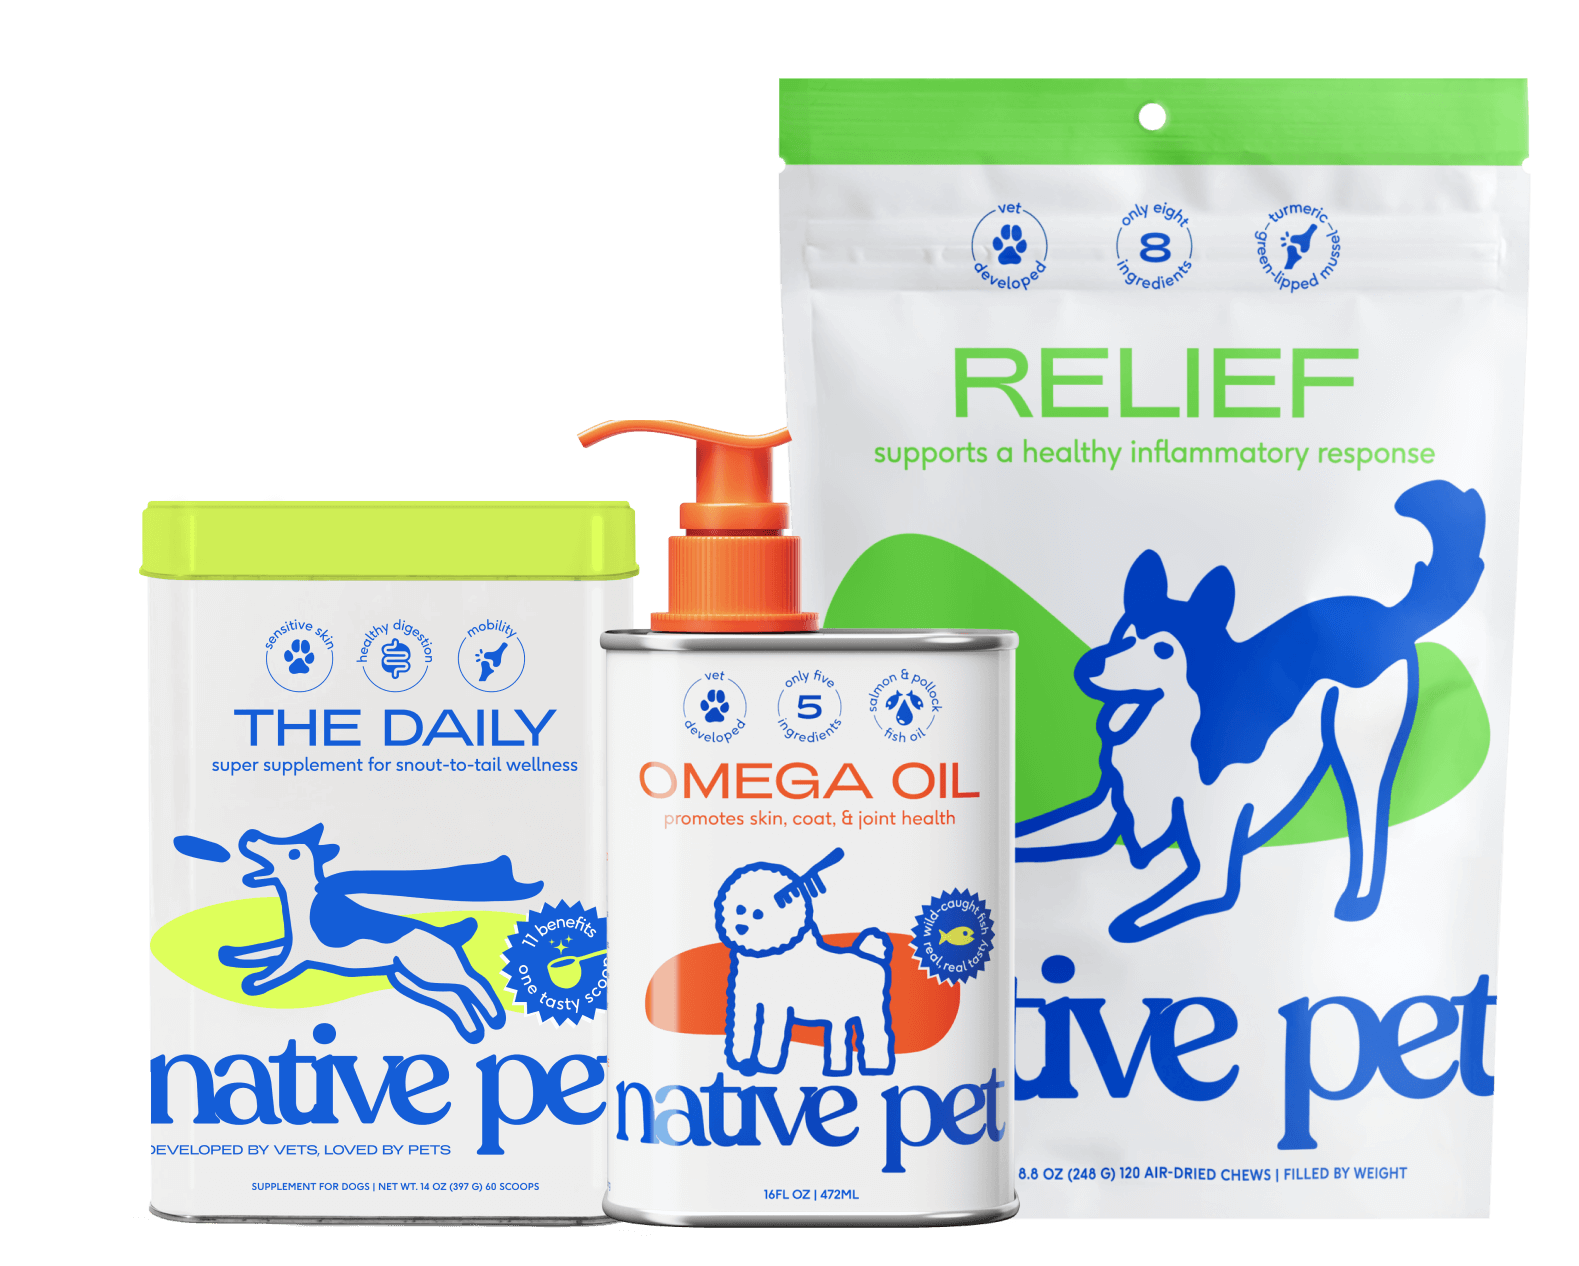 Native Pet The Daily, Omega Oil, and Relief Chews